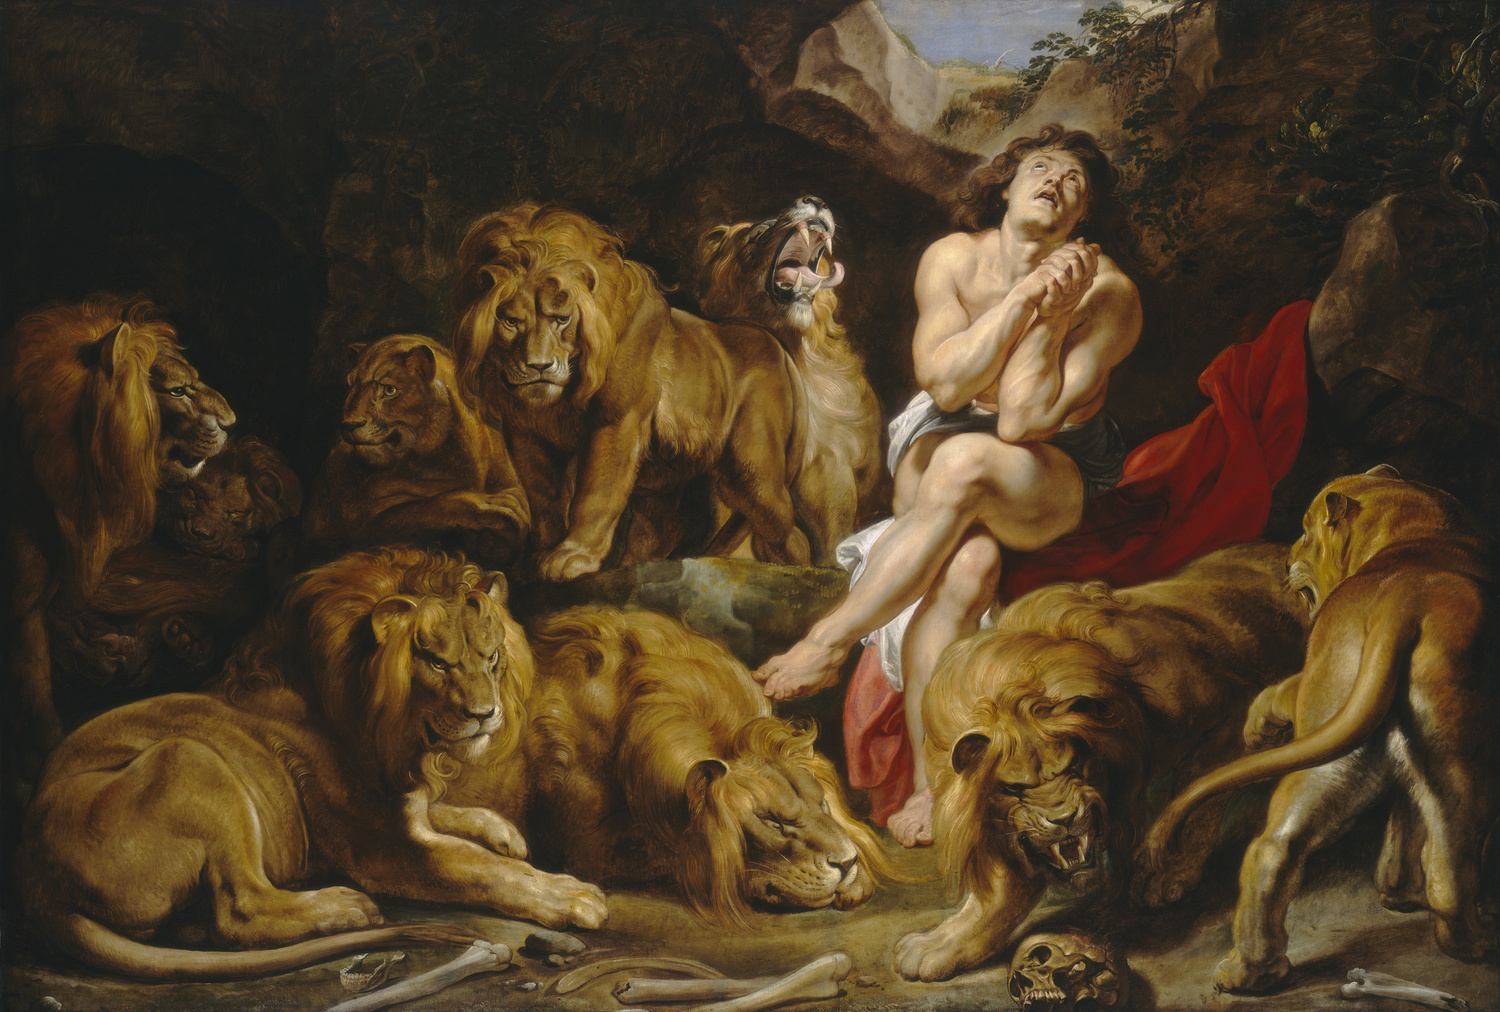 Daniel in the Lions' Den, by Sir Peter Paul Rubens, 1614-1616, Flemish painting, oil on canvas. God closed the jaws of the lions, as Daniel prayed in the lion's den. King Darius the Mede was tricked into signing Daniel's death warrant by jealous colleague